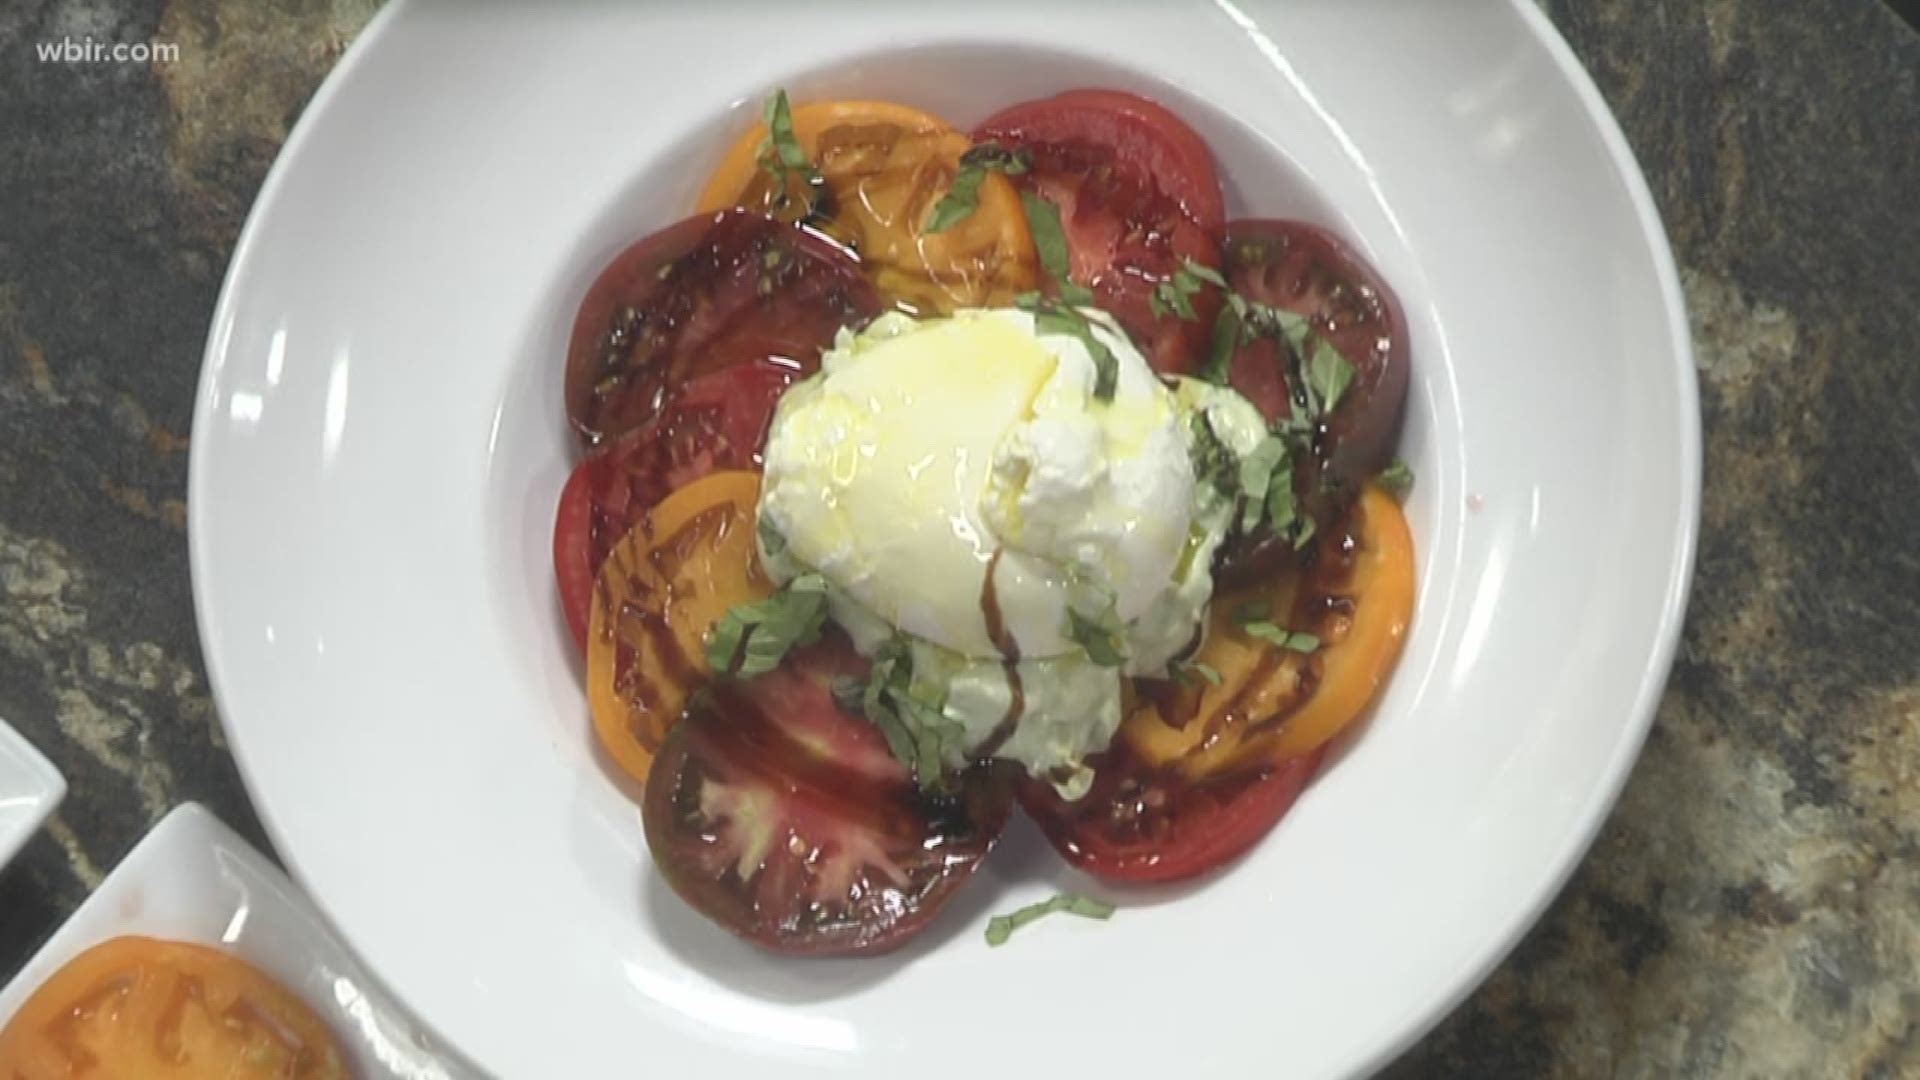 Gary Nicely is joining us from Naples Italian Restaurant this afternoon... and he has a delicious tomato dish for us!